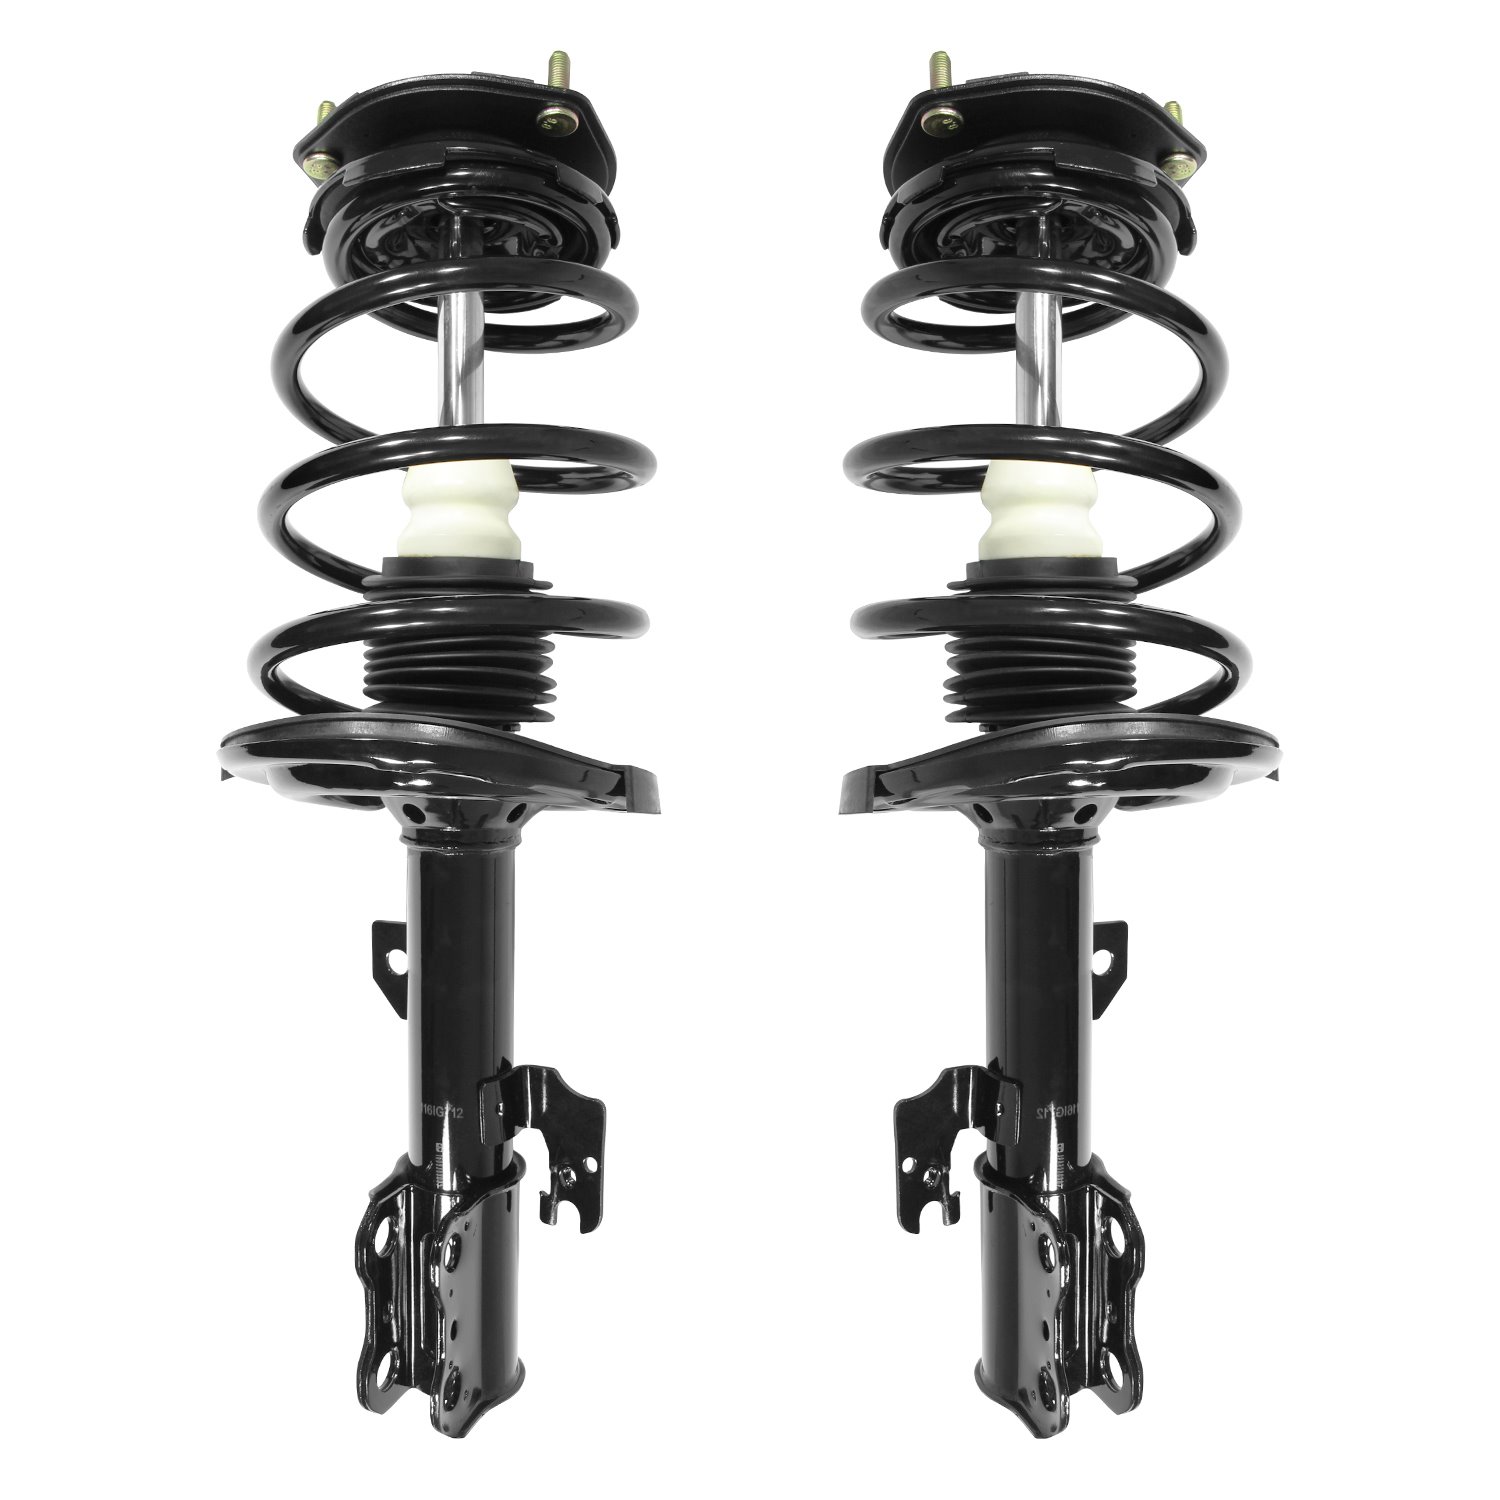 2-11711-11712-001 Suspension Strut & Coil Spring Assembly Set Fits Select Lexus ES330, Toyota Camry, Toyota Solara